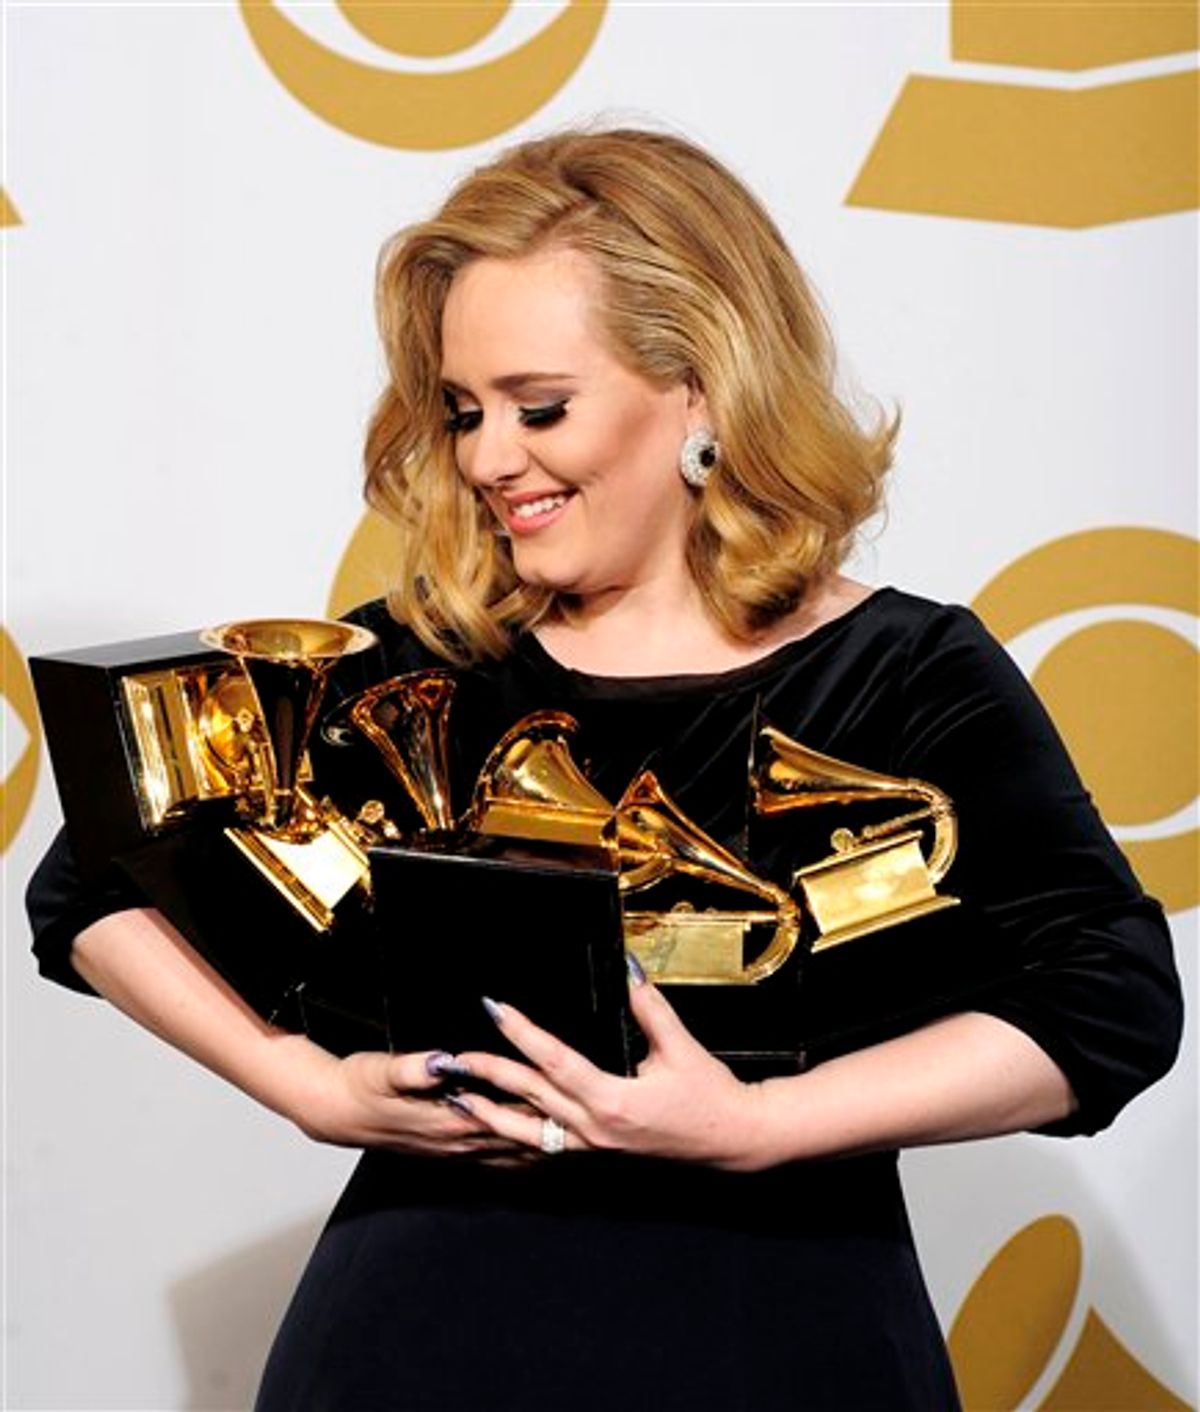 Adele poses backstage with her six awards at the 54th annual Grammy Awards on Sunday, Feb. 12, 2012 in Los Angeles. Adele won awards for best pop solo performance for "Someone Like You," song of the year, record of the year, and best short form music video for "Rolling in the Deep," and album of the year and best pop vocal album for "21." (AP Photo/Mark J. Terrill)      (AP)